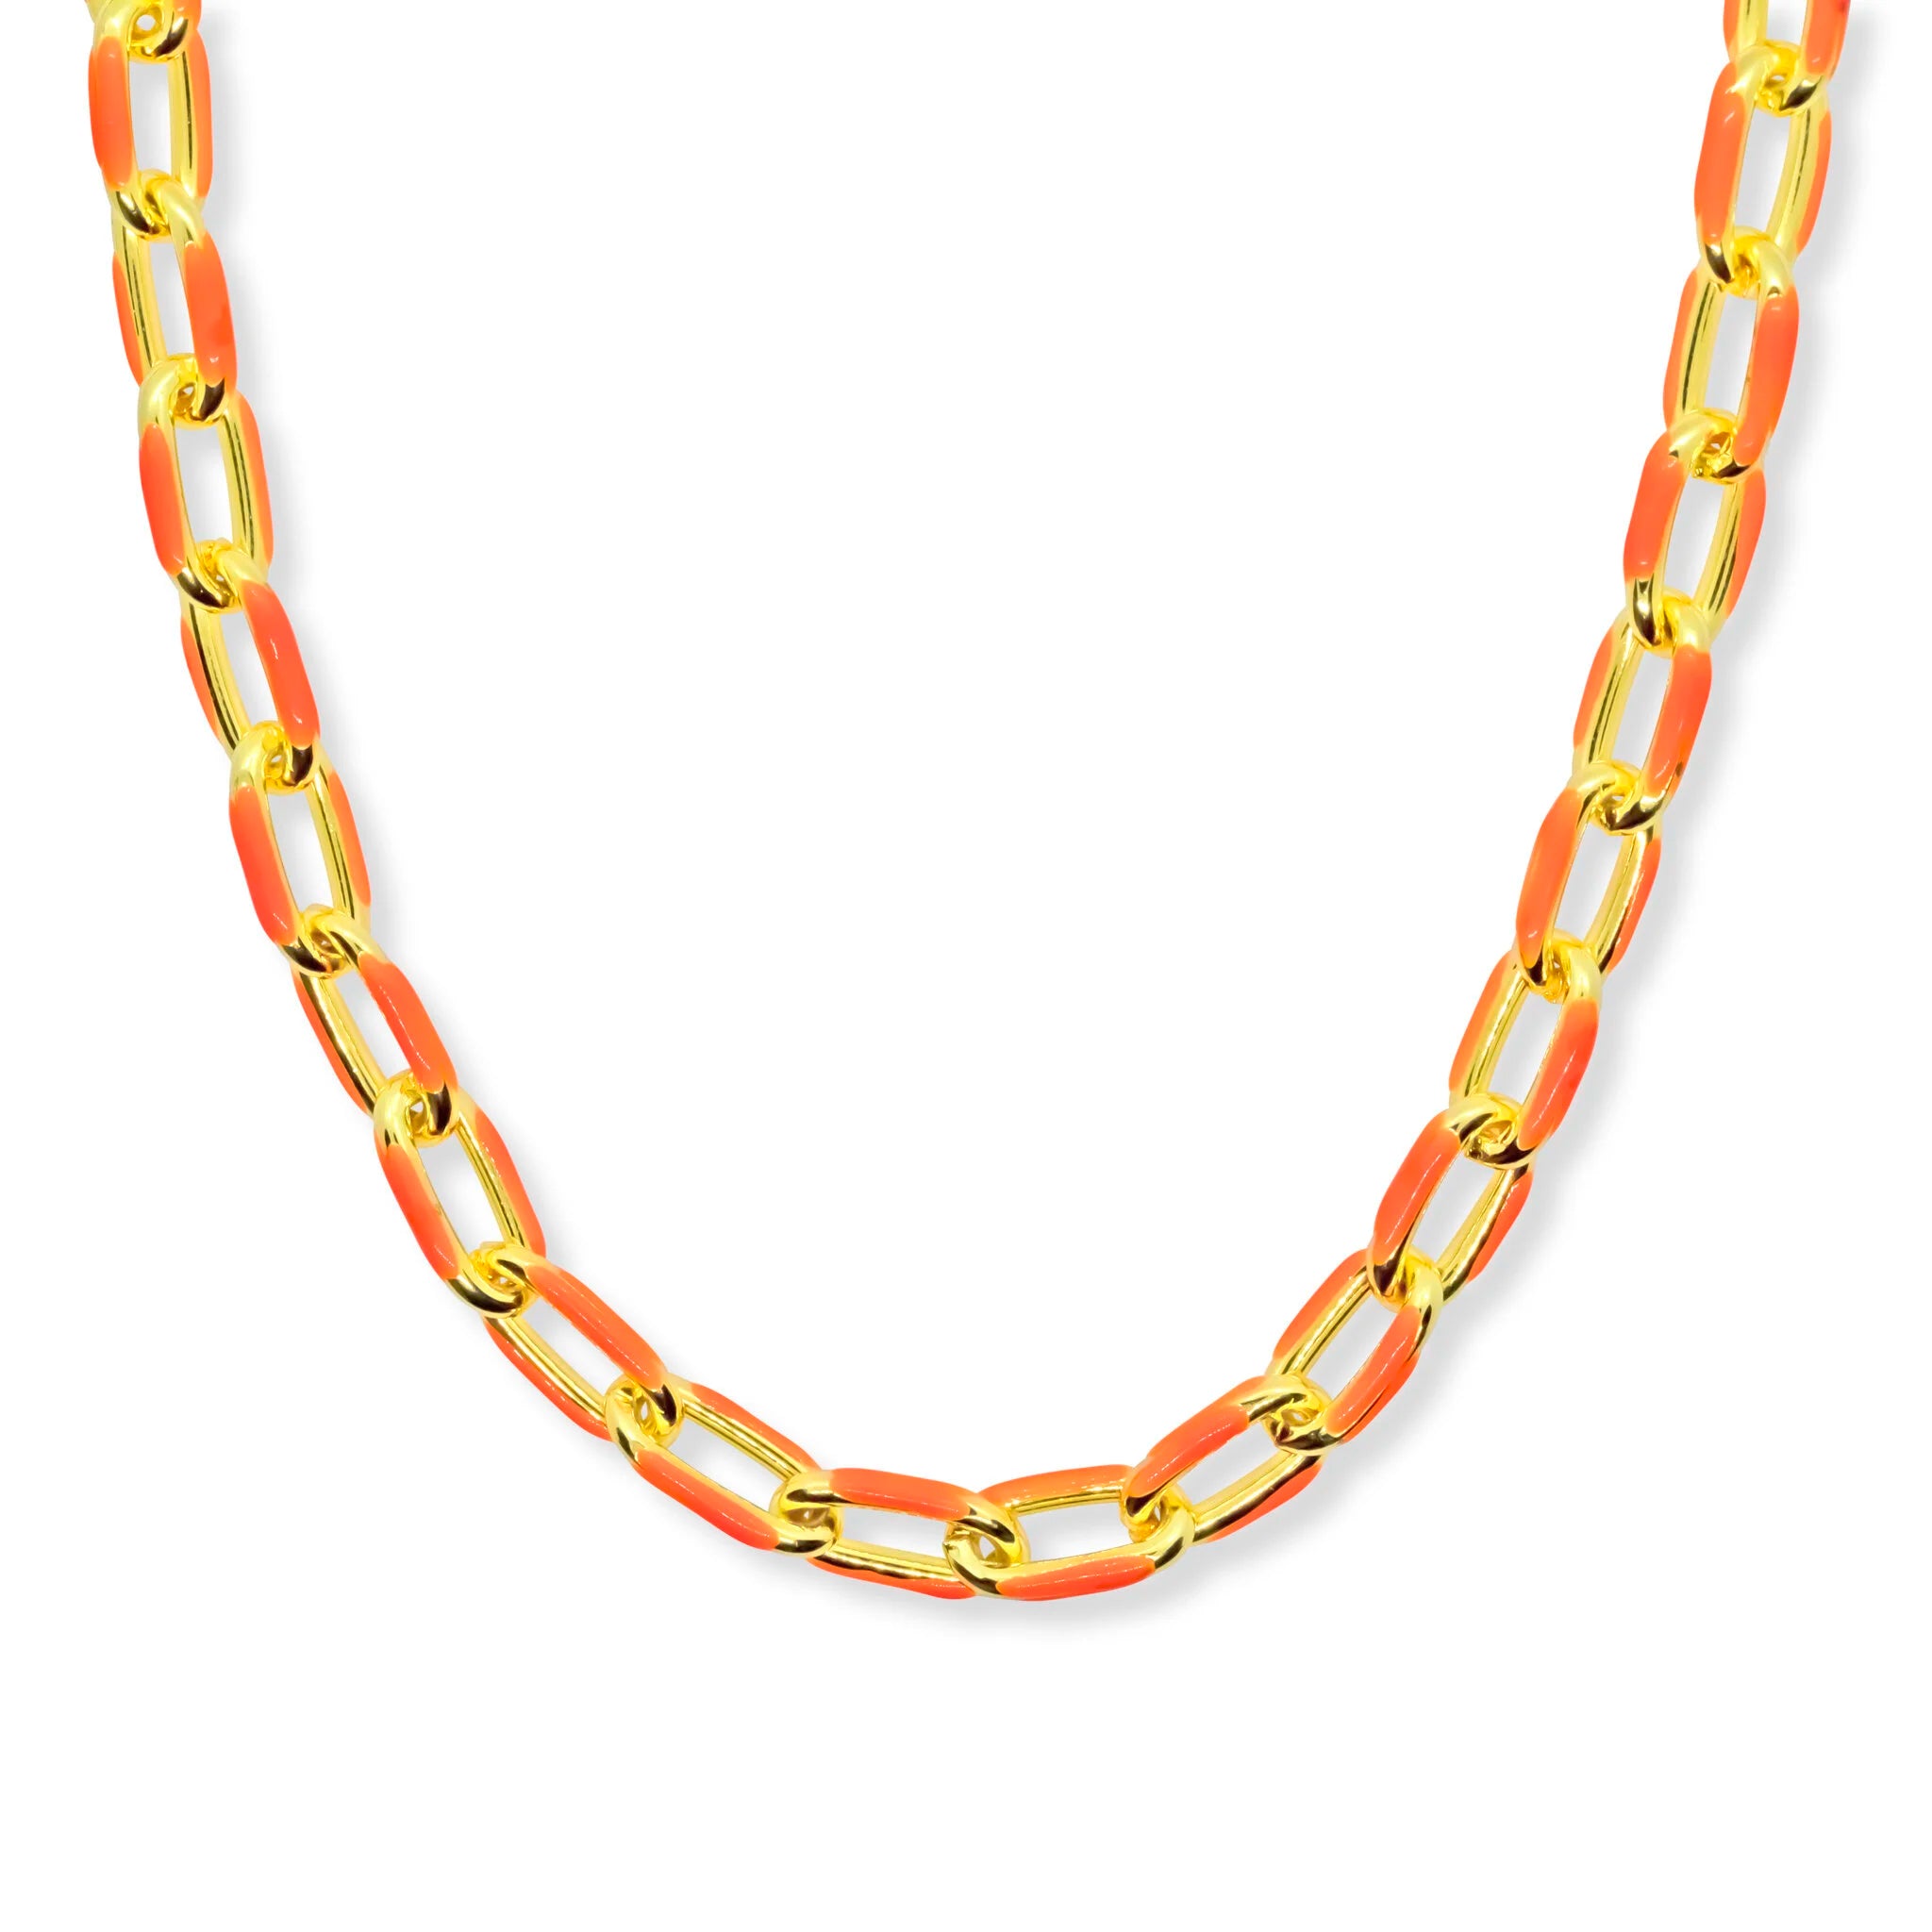 N321 The Baxter Paperclip Enamel Chain Collection